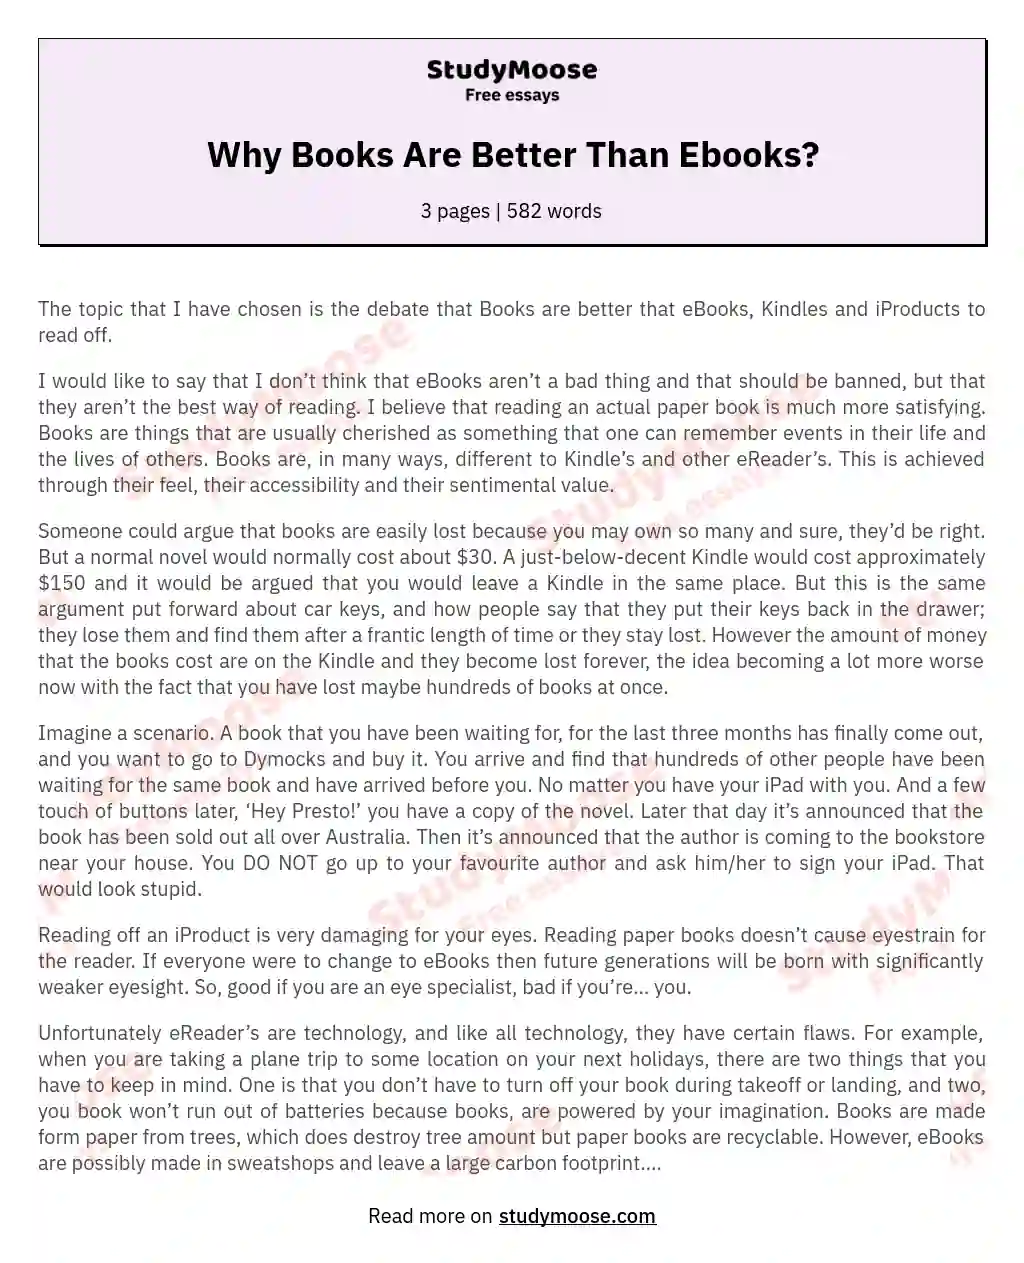 Why Books Are Better Than Ebooks? essay